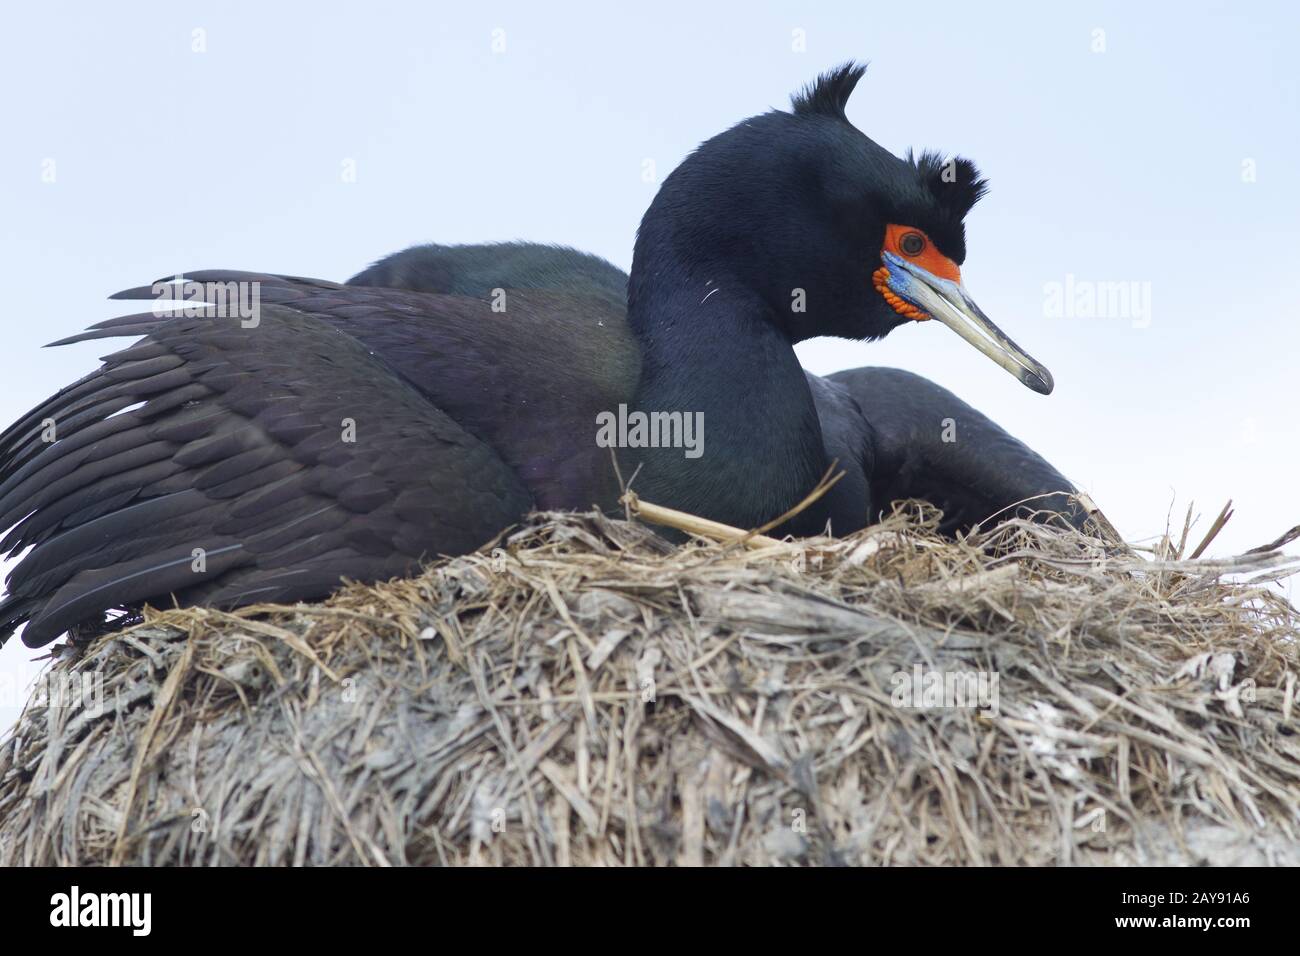 Red-faced cormorant sitting on a nest with open wings in a colony of seabirds Stock Photo